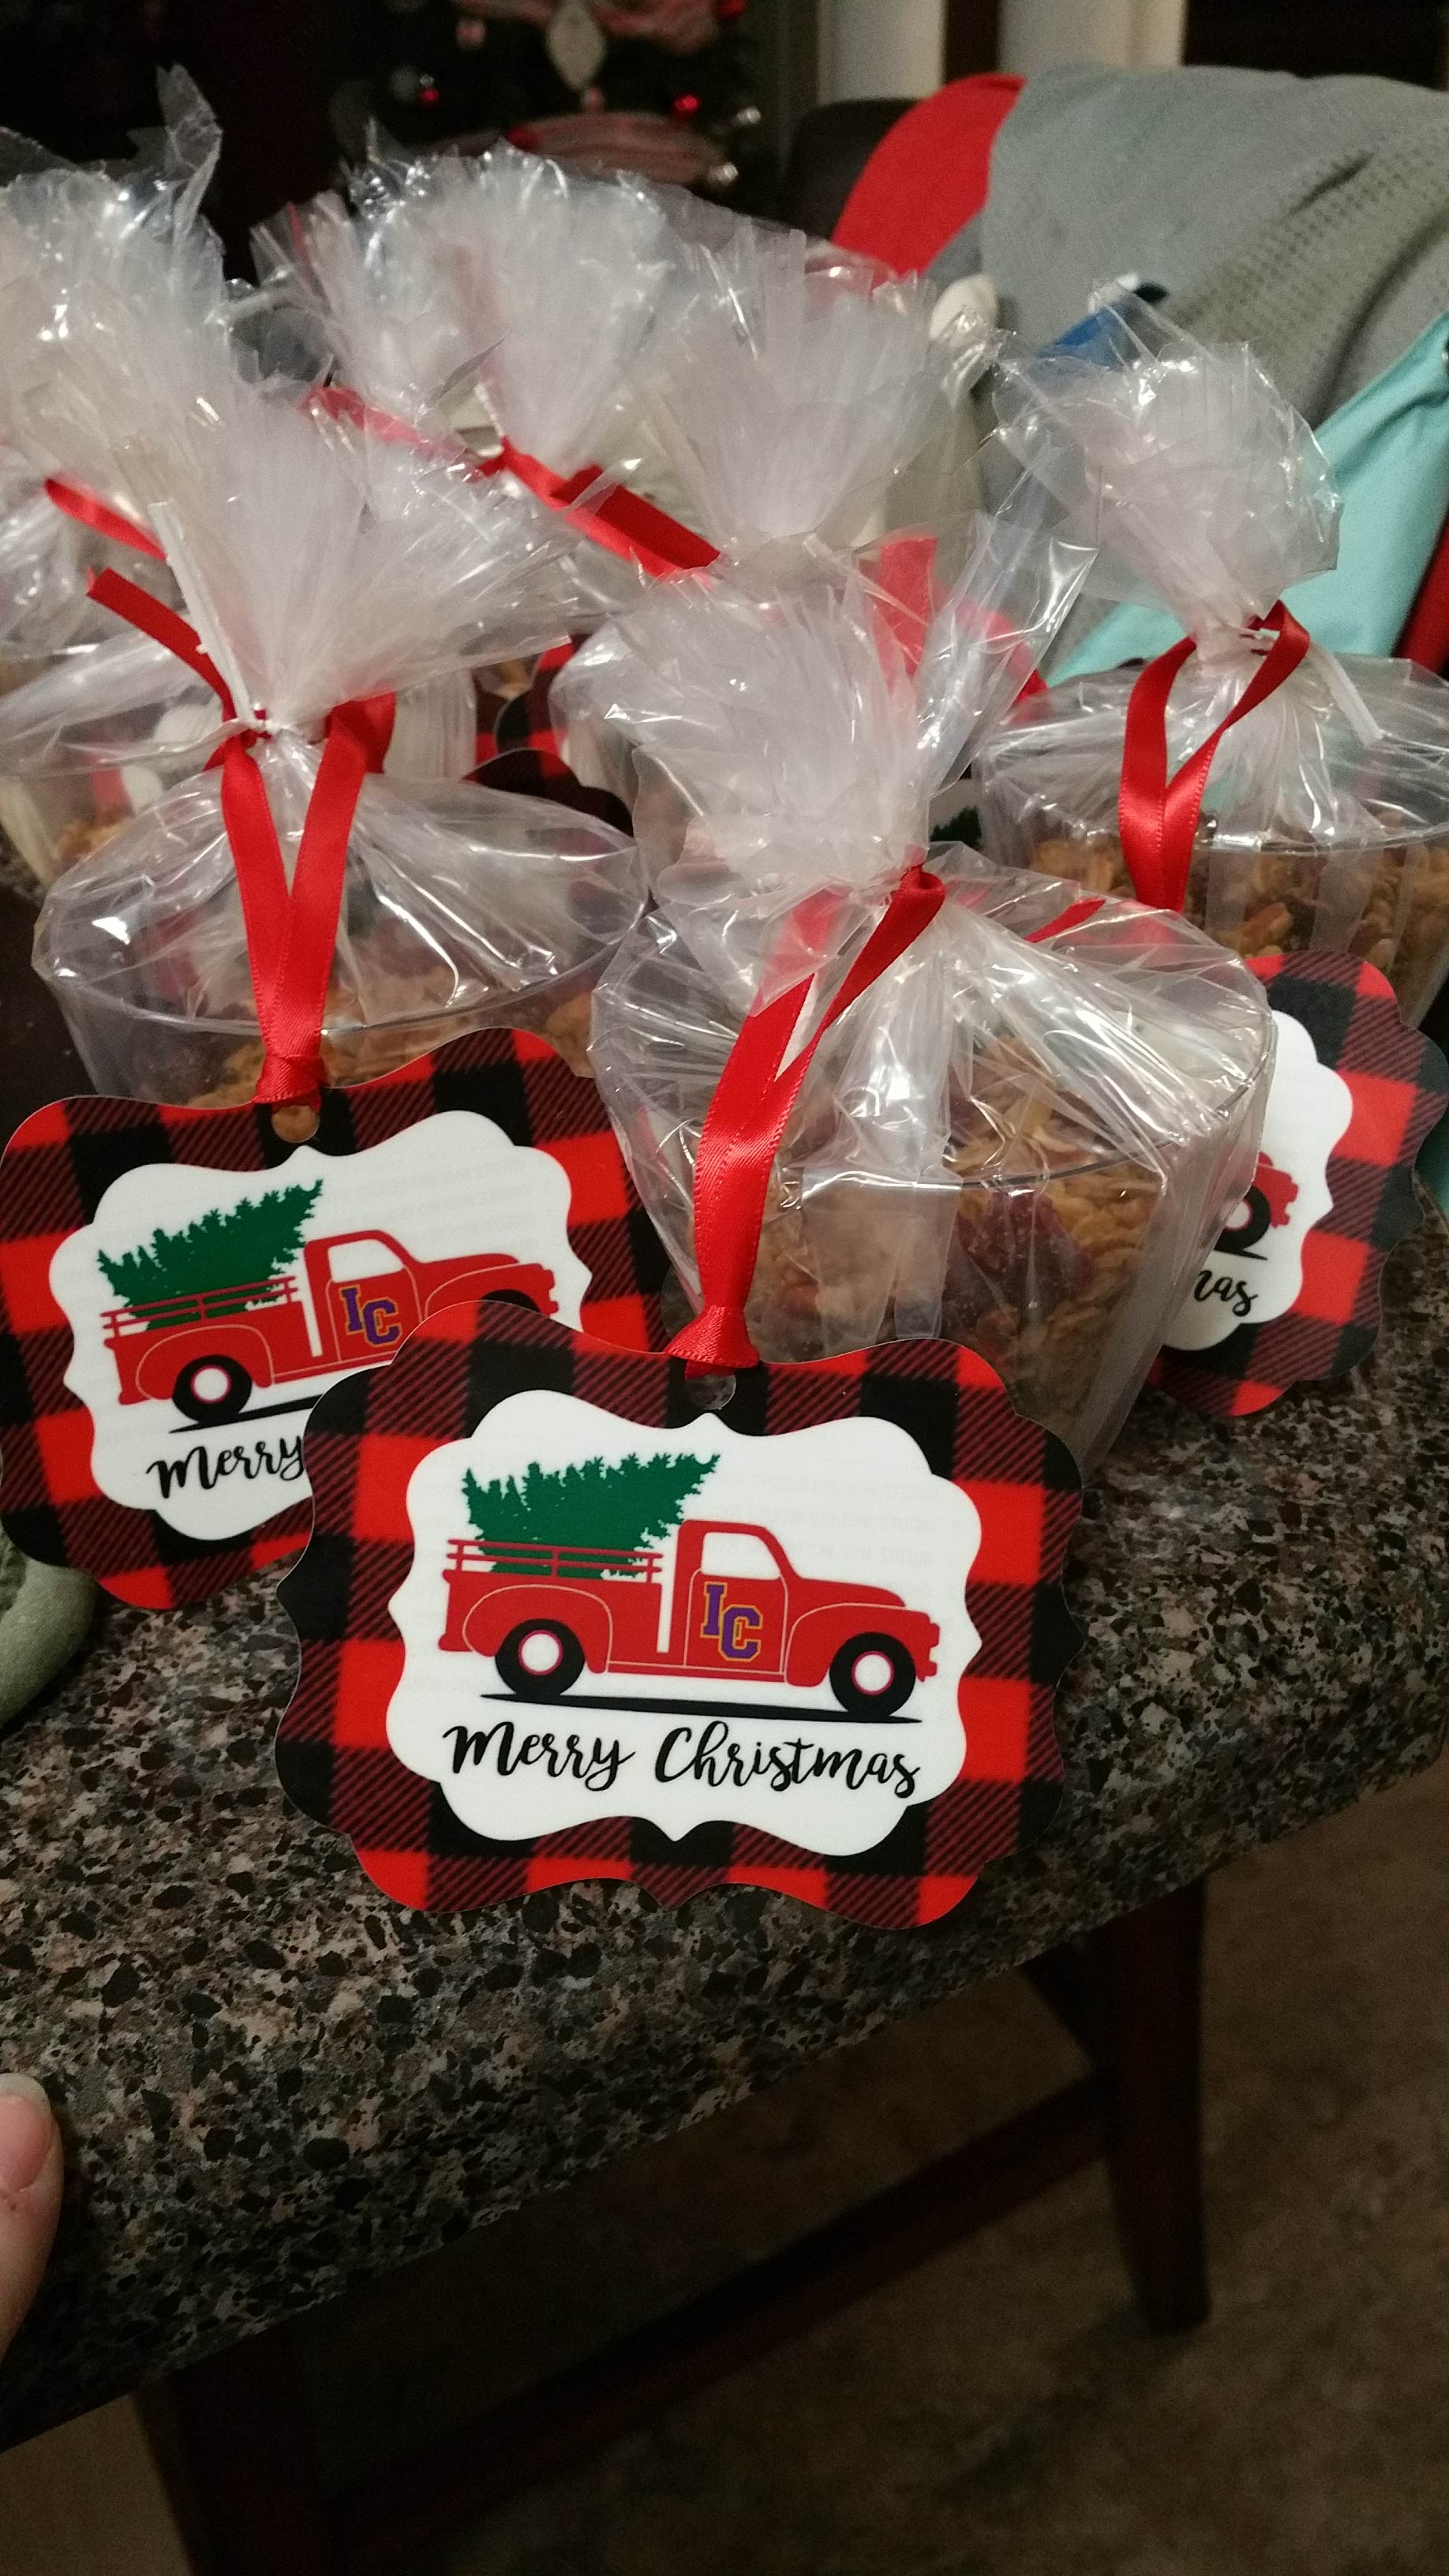 Ornaments and granola made with sublimation printing